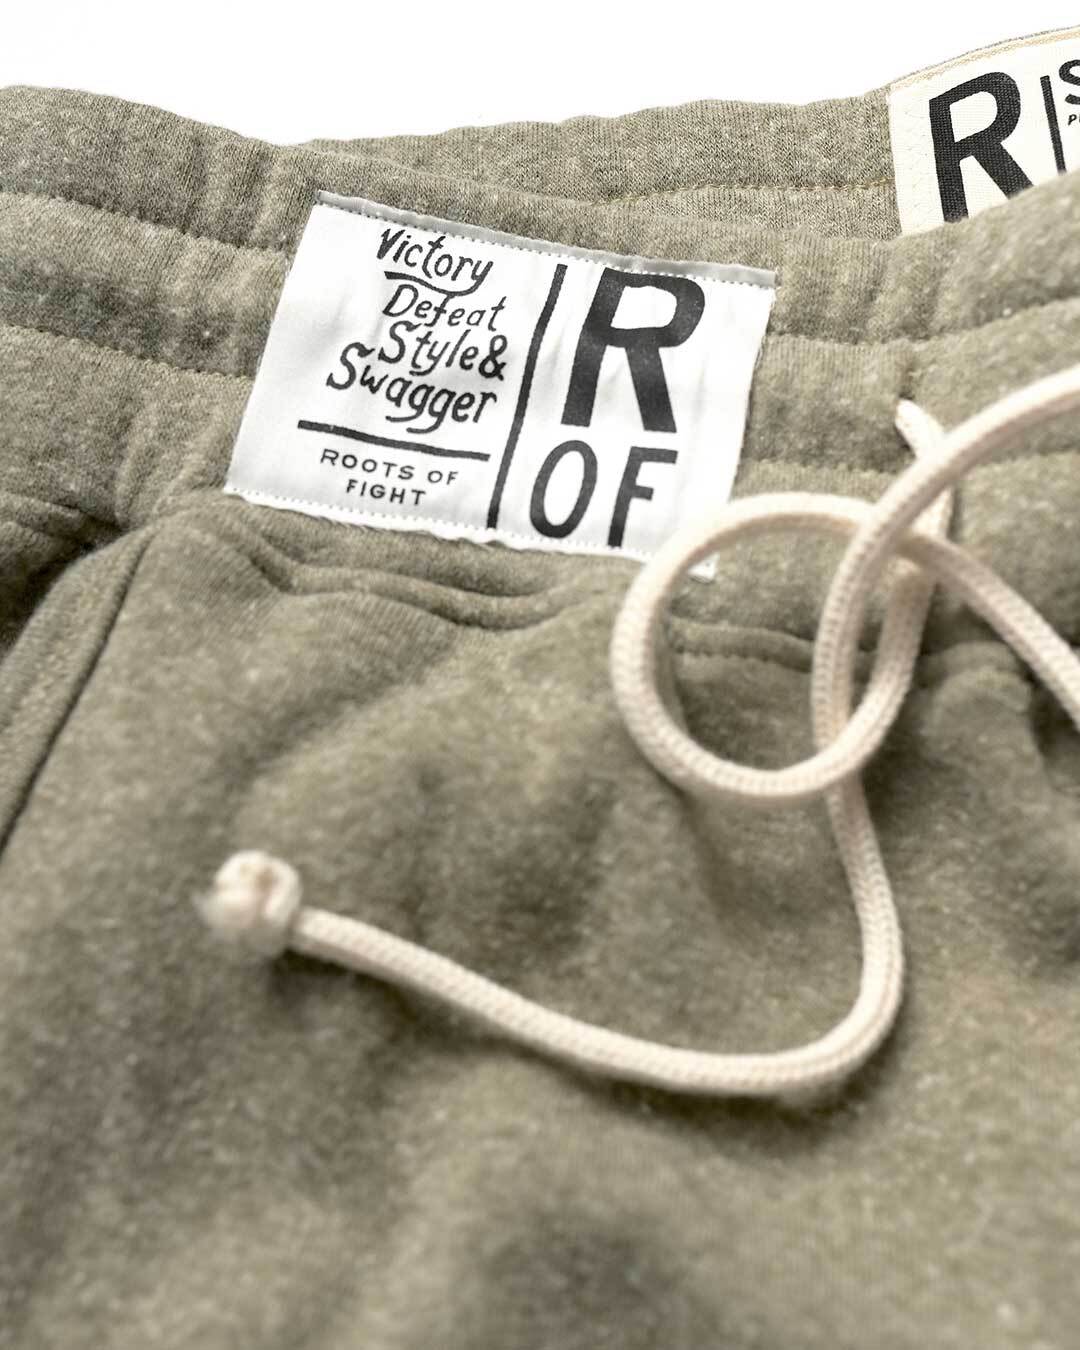 Clemente Parris Island Heather Olive Sweatpants - Roots of Fight